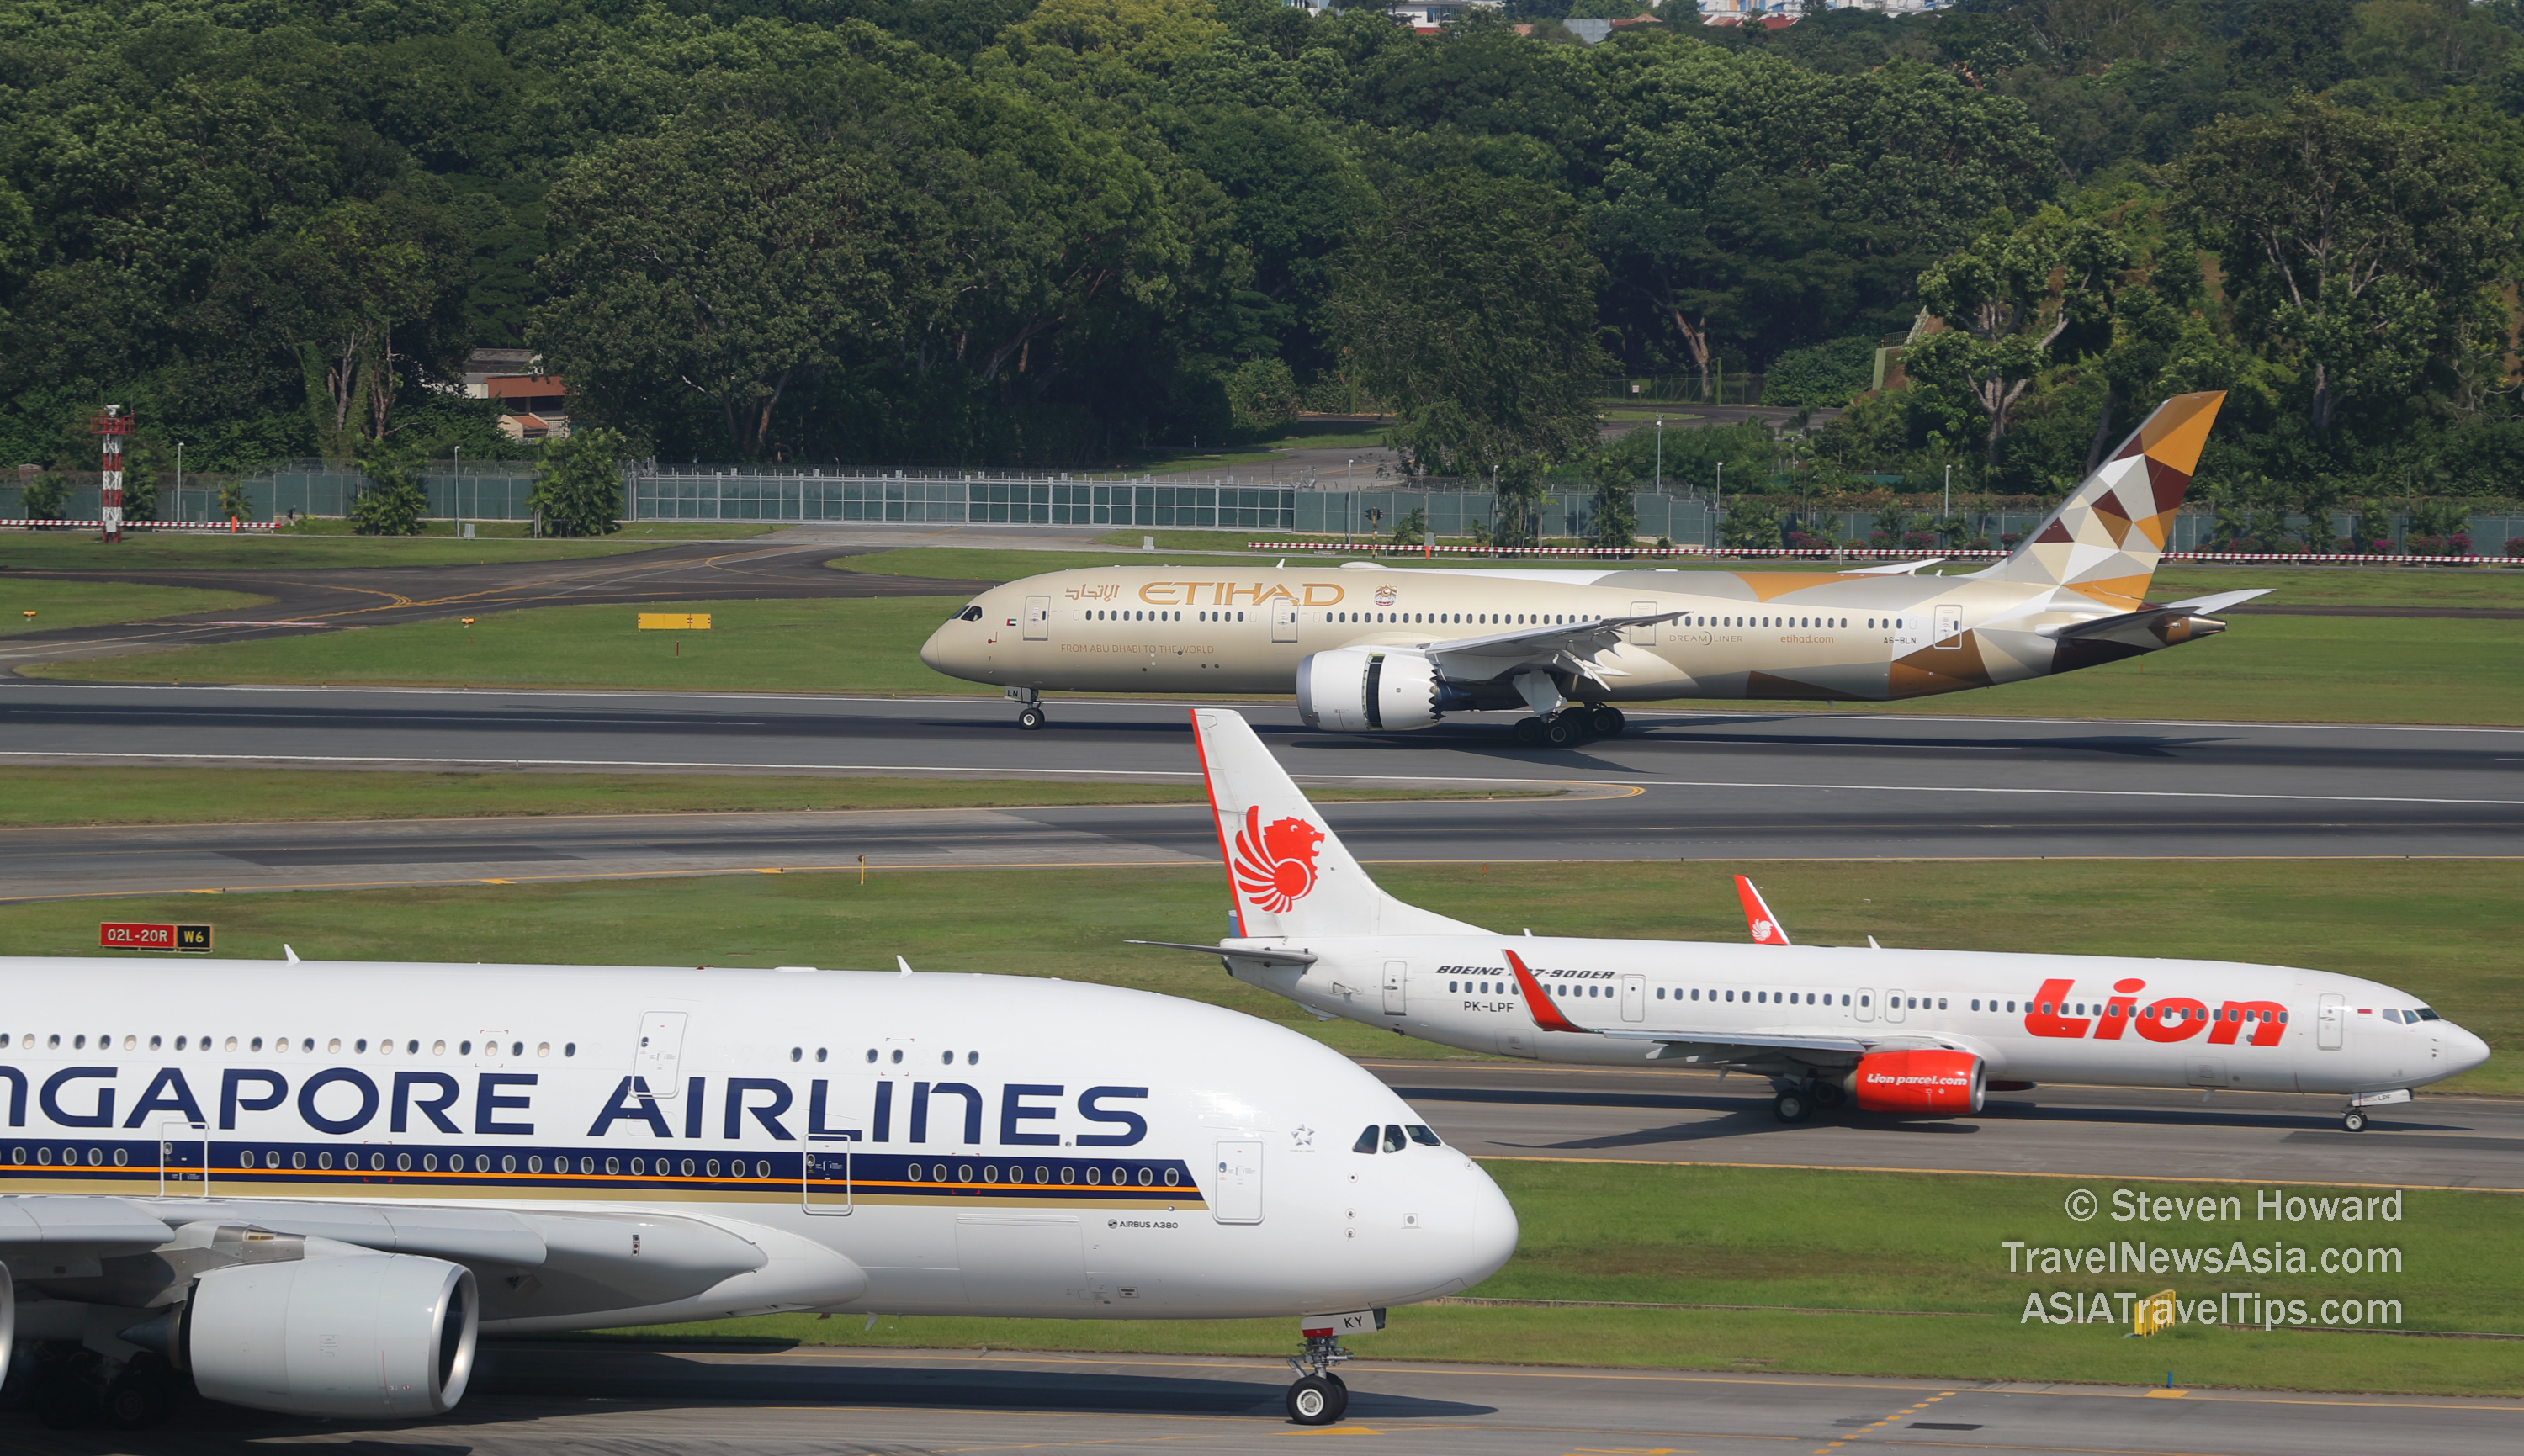 Aircraft at Changi Airport in Singapore. Picture by Steven Howard of TravelNewsAsia.com Click to enlarge.